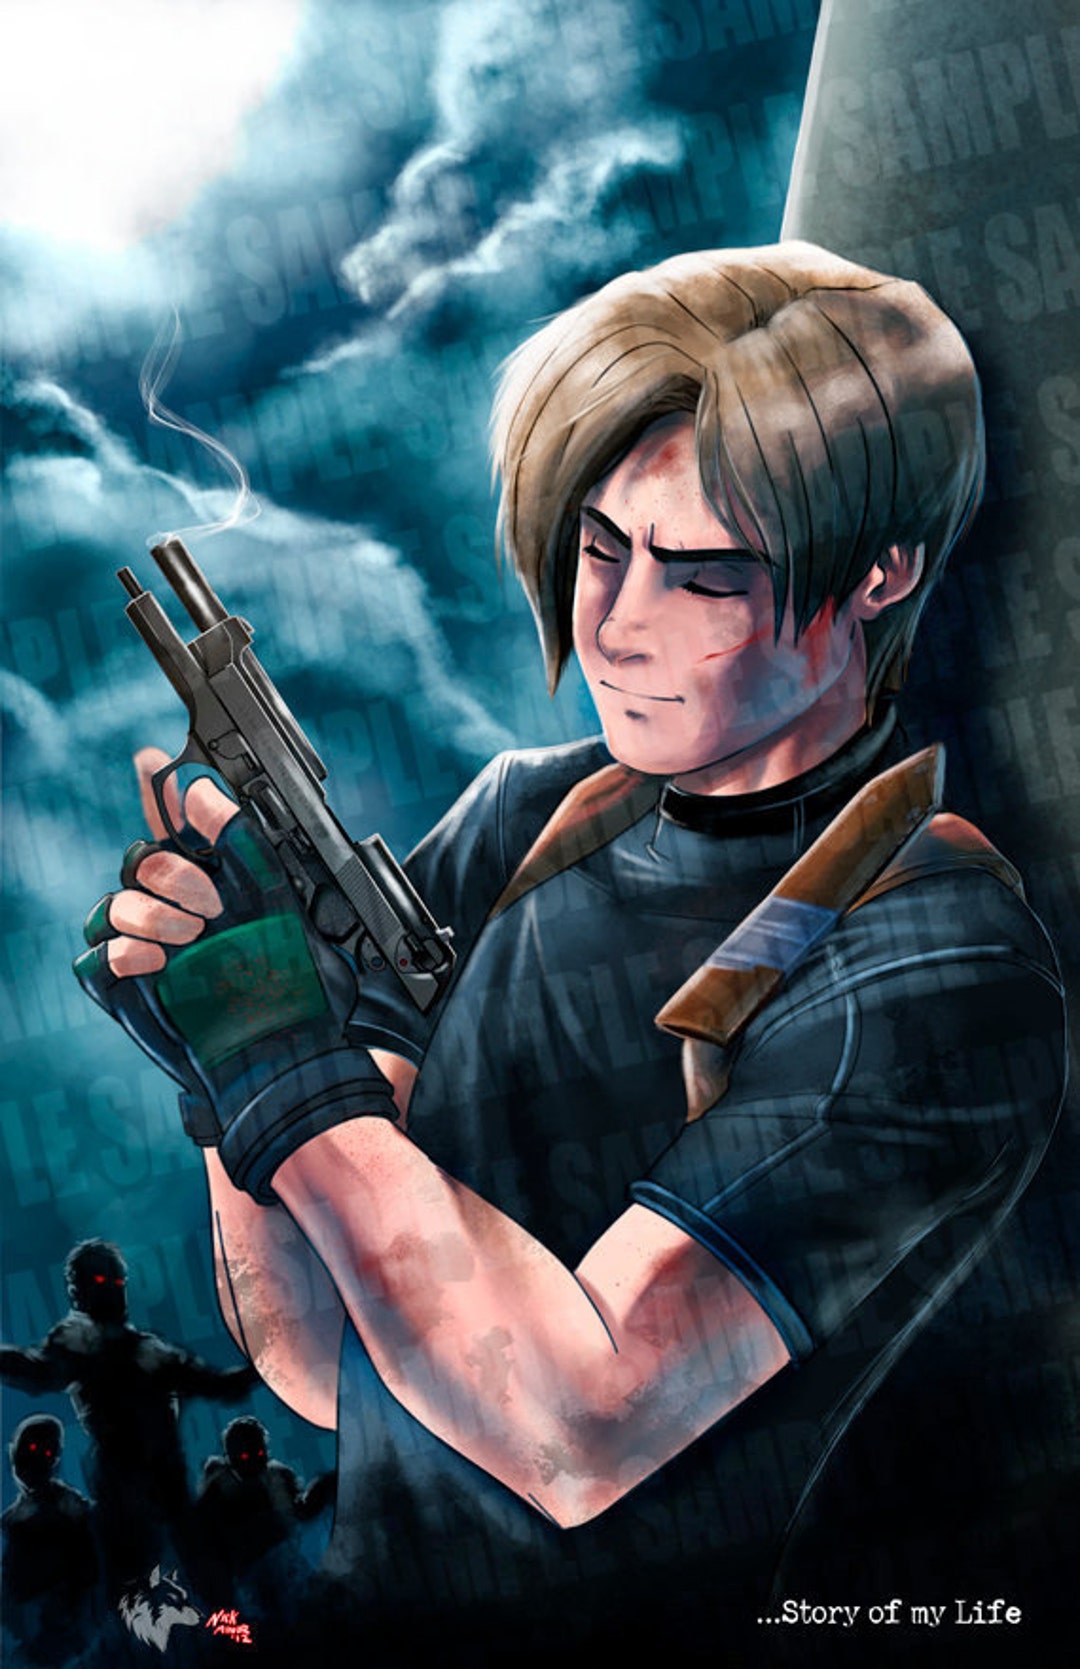 Working on this new Resident Evil 4 fanart makes me really wanna